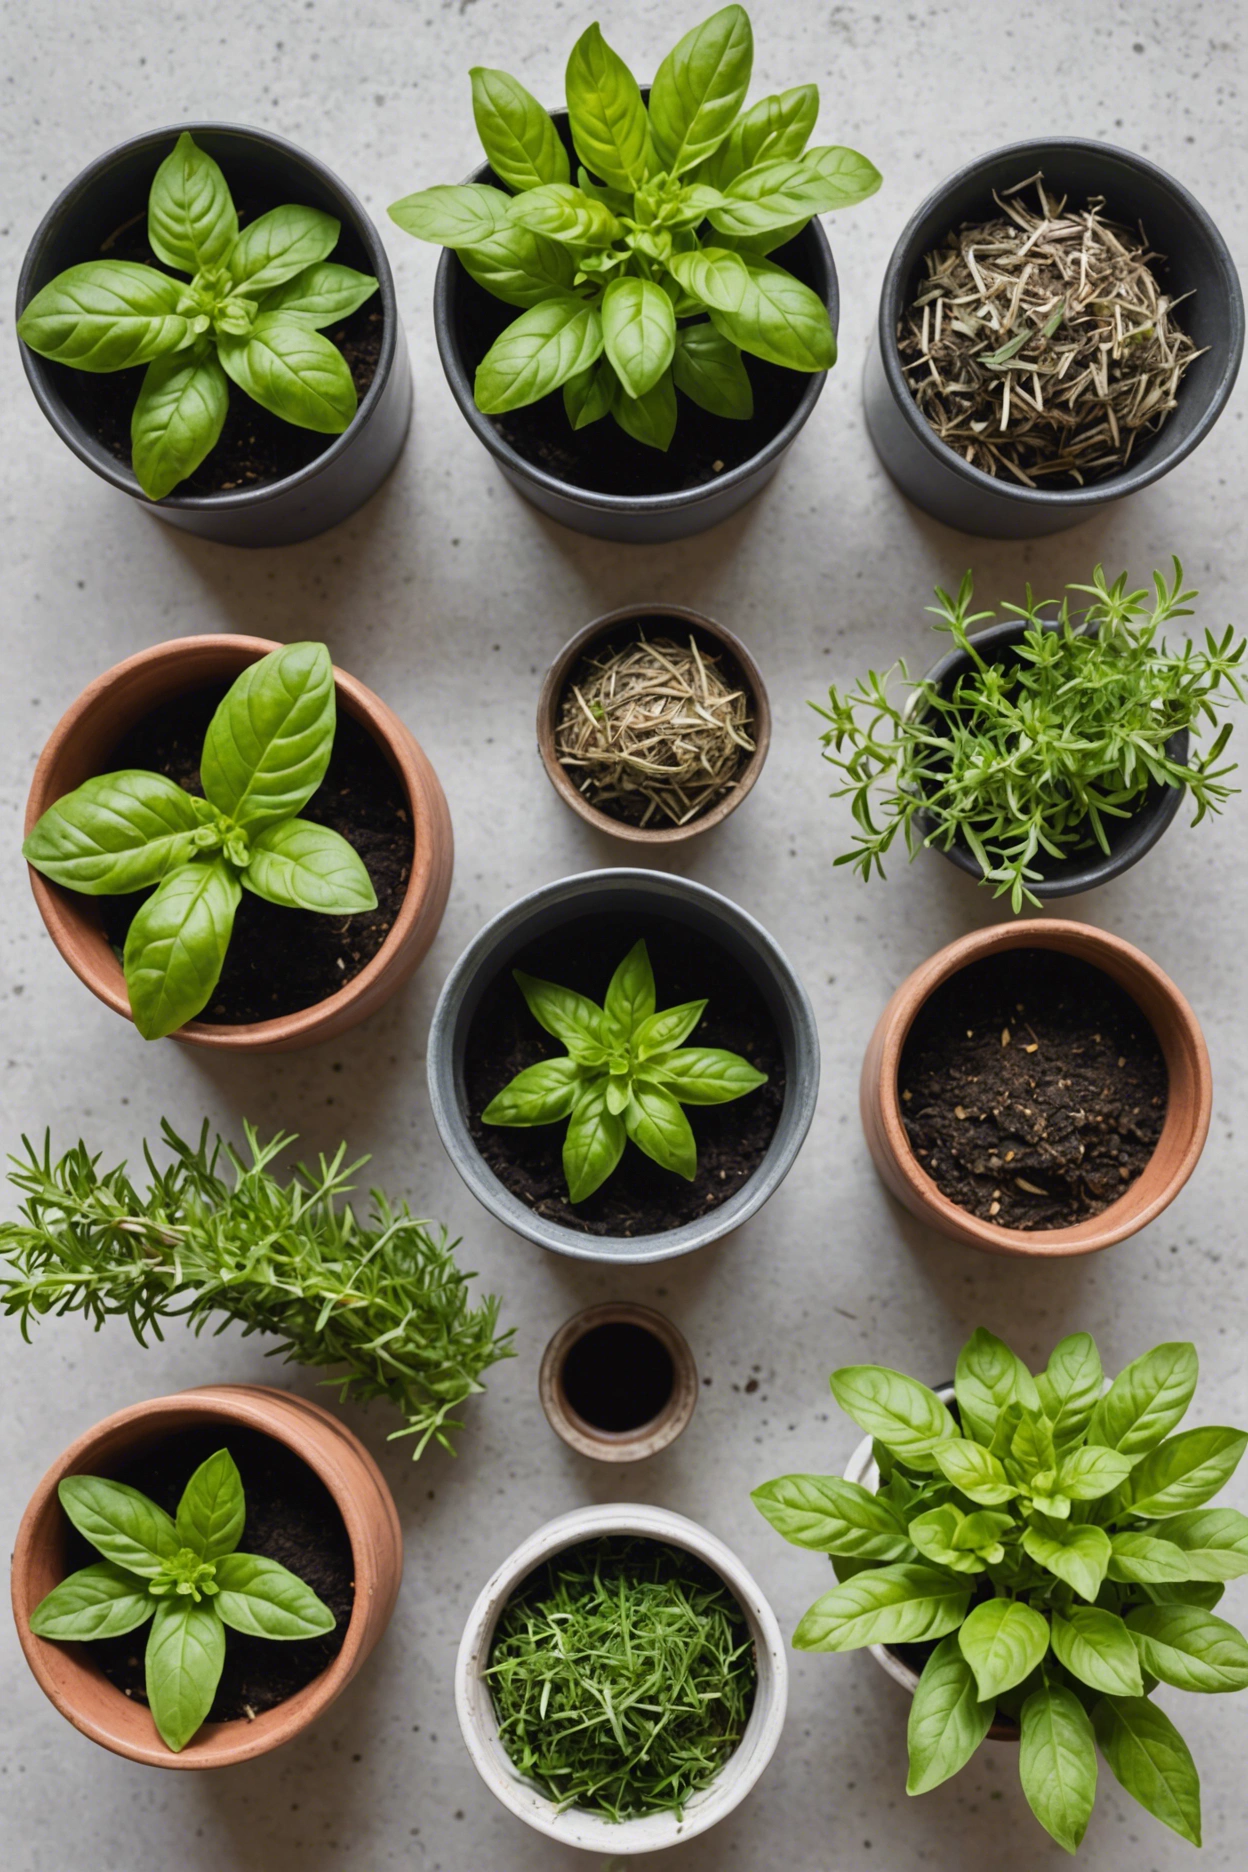 "Close-up of wilting herbs in pots with yellowing leaves and limp stems, alongside plant care tools."